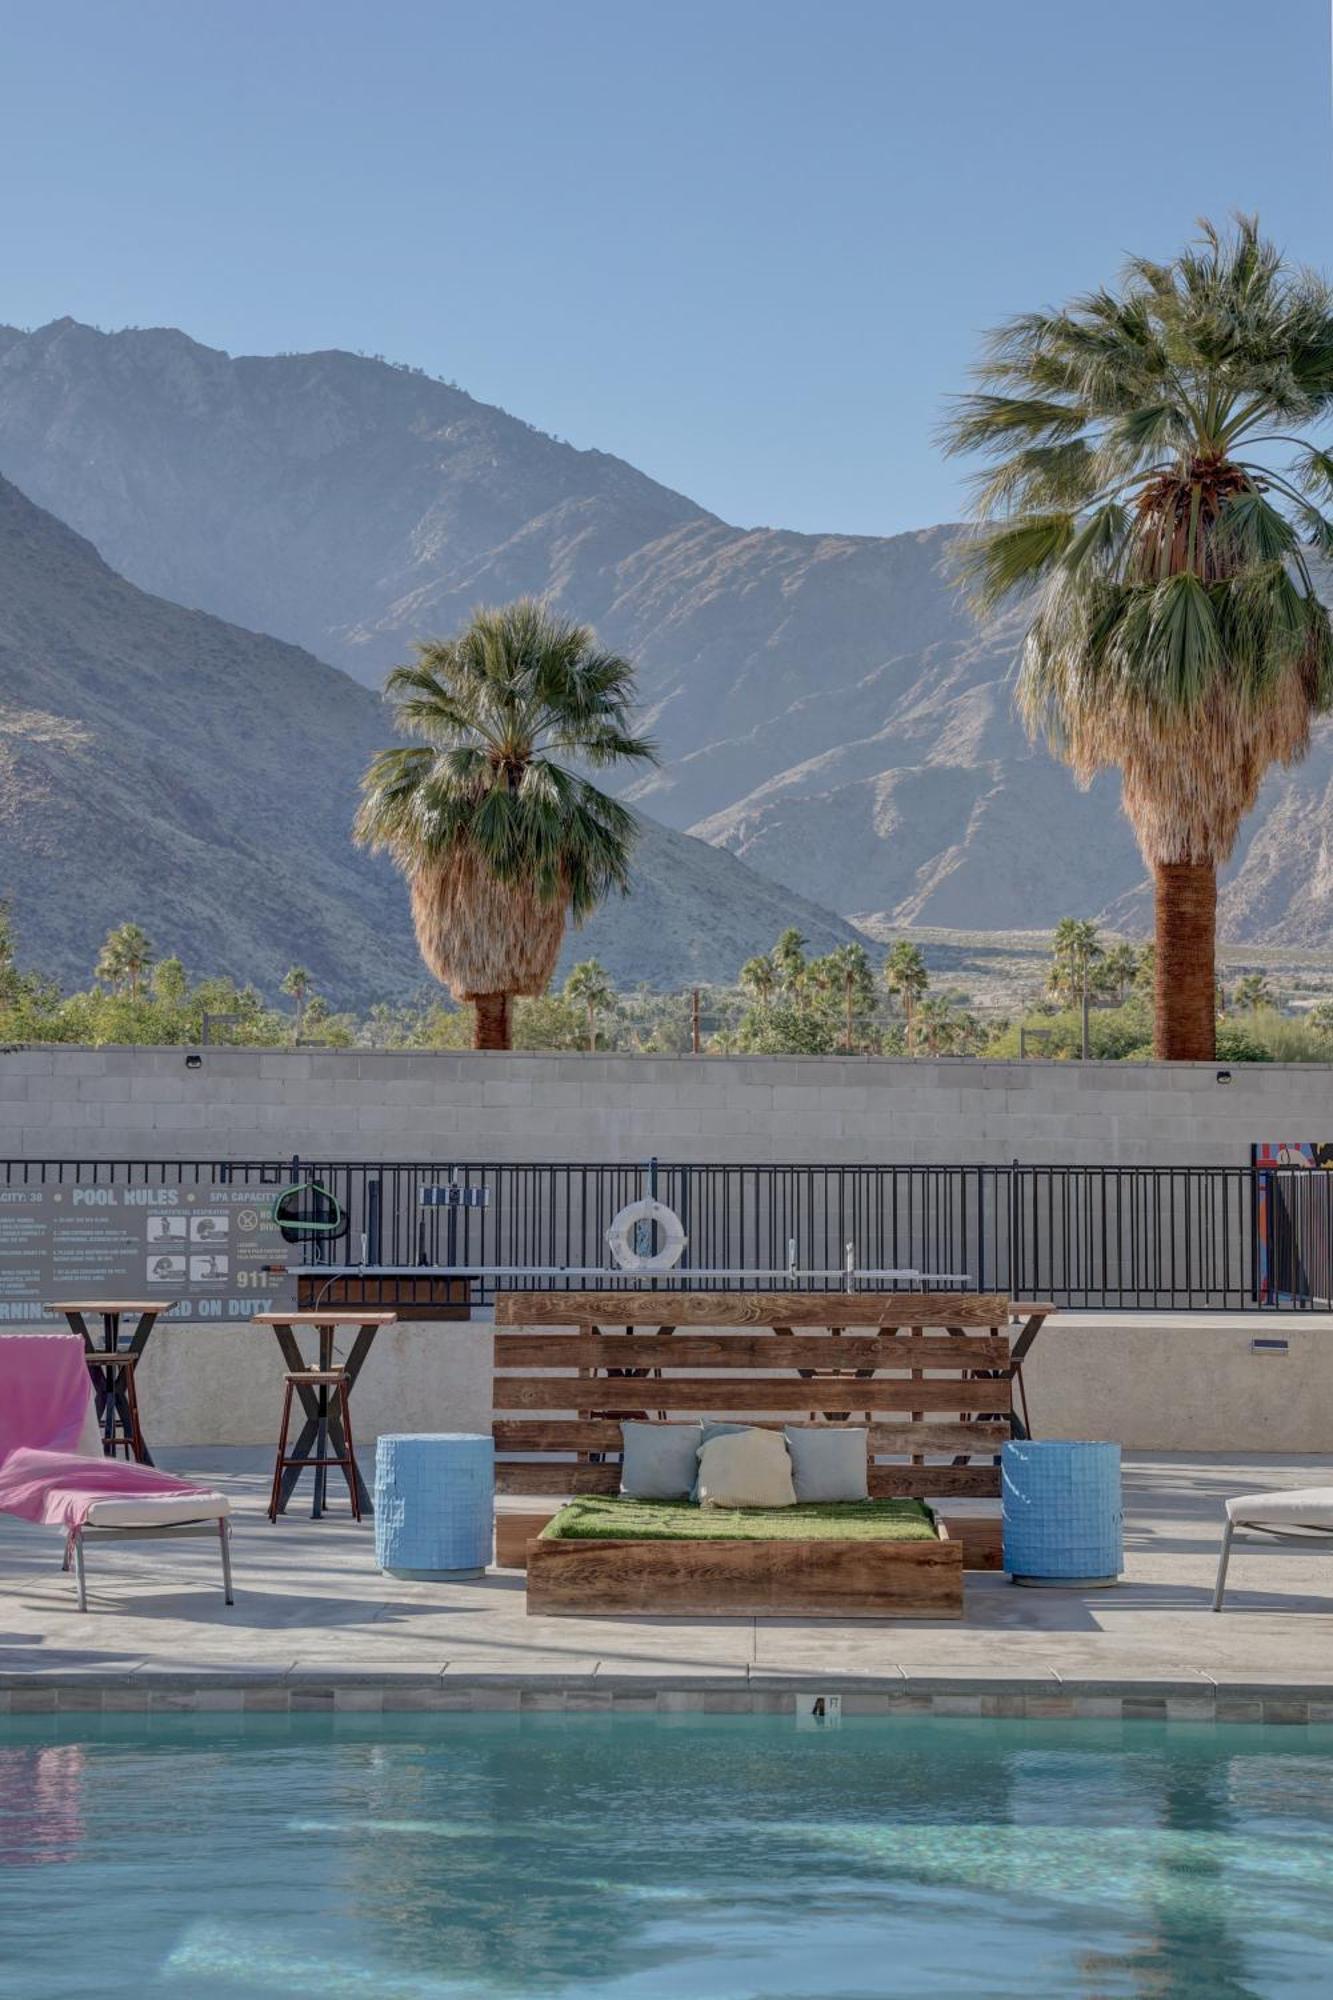 The Infusion Beach Club Palm Springs Buitenkant foto